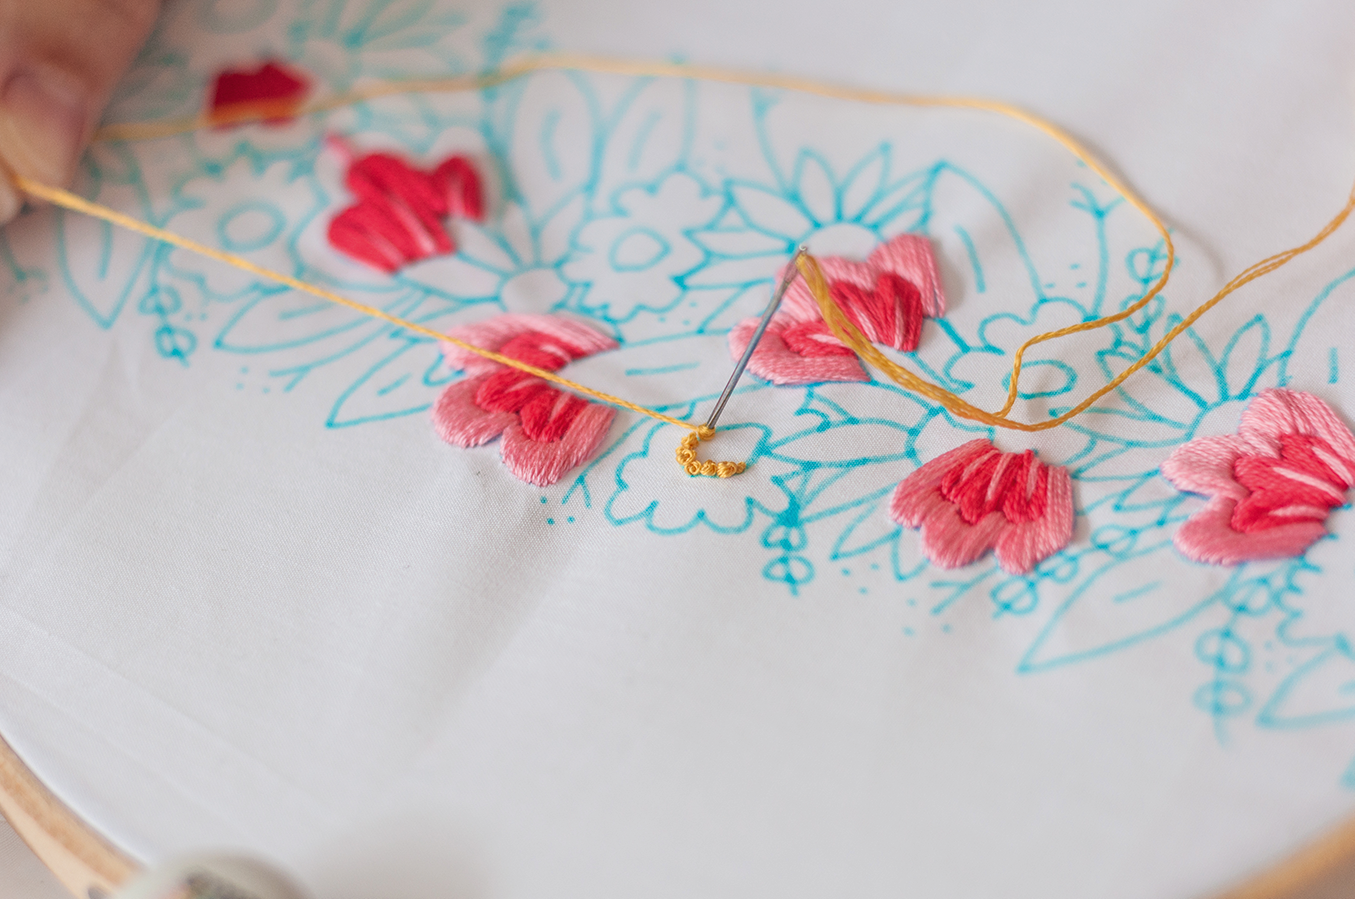 Neck embroidery design- Step by step 